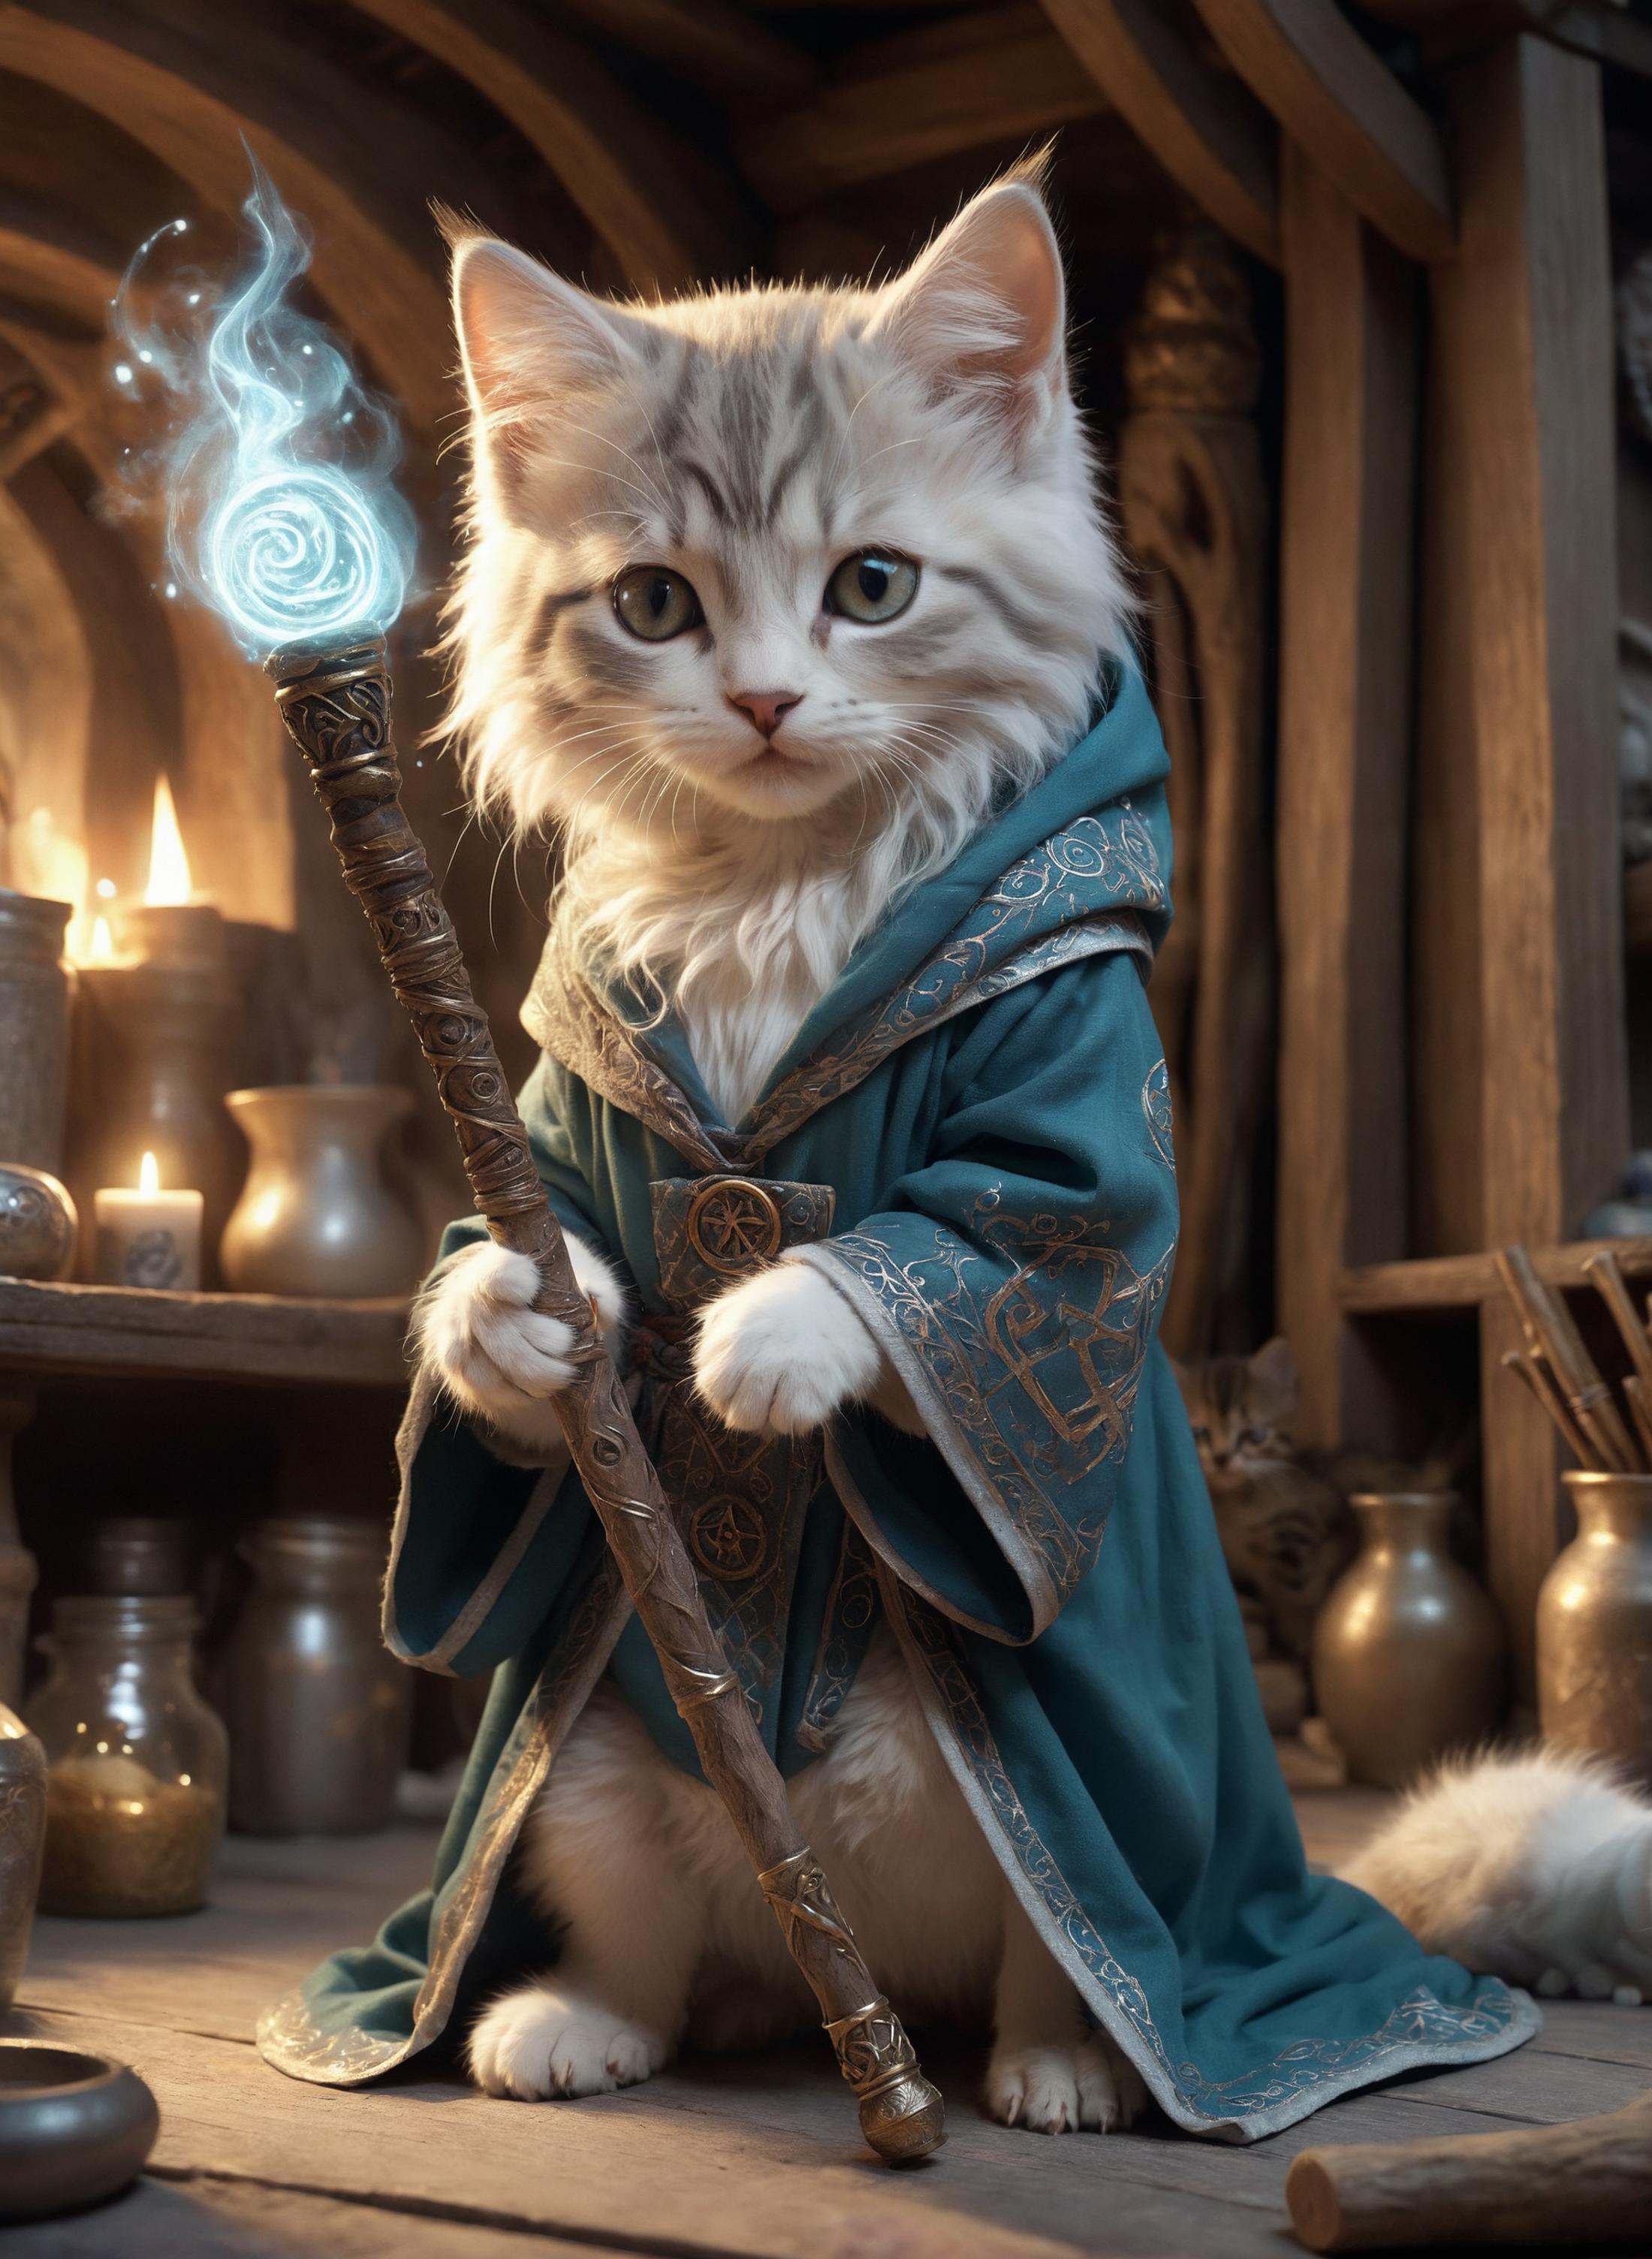 A cat dressed as a wizard holding a wand.